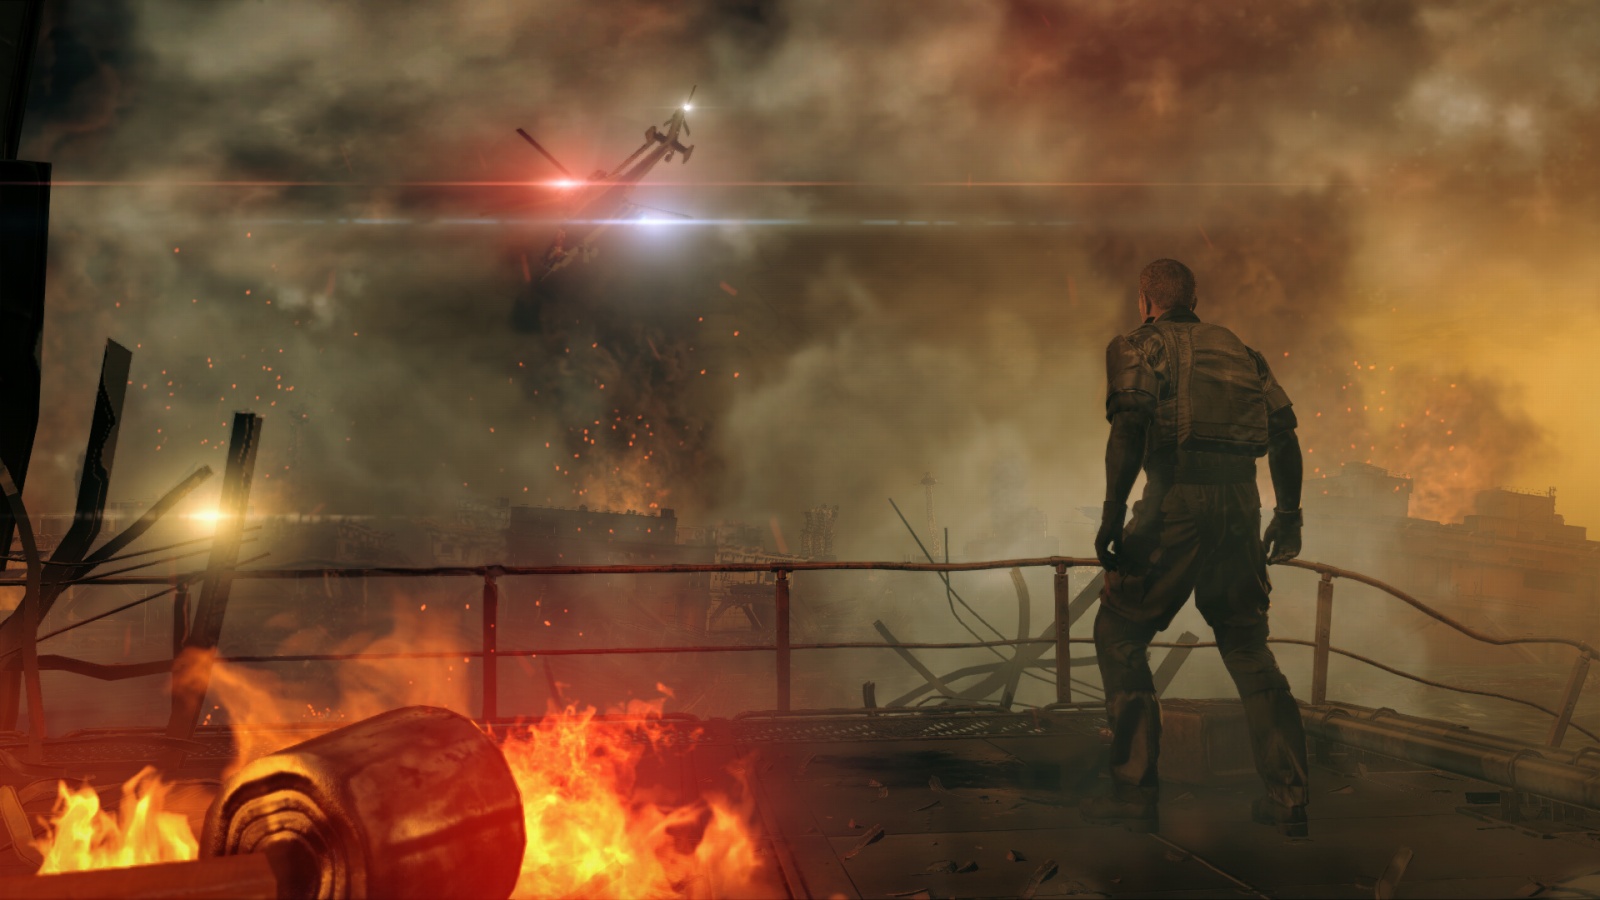 Media asset in full size related to 3dfxzone.it news item entitled as follows: Konami mostra una demo del gameplay del game Metal Gear Survive | Image Name: news24952_Metal-Gear-Survive_Screenshot_1.jpg